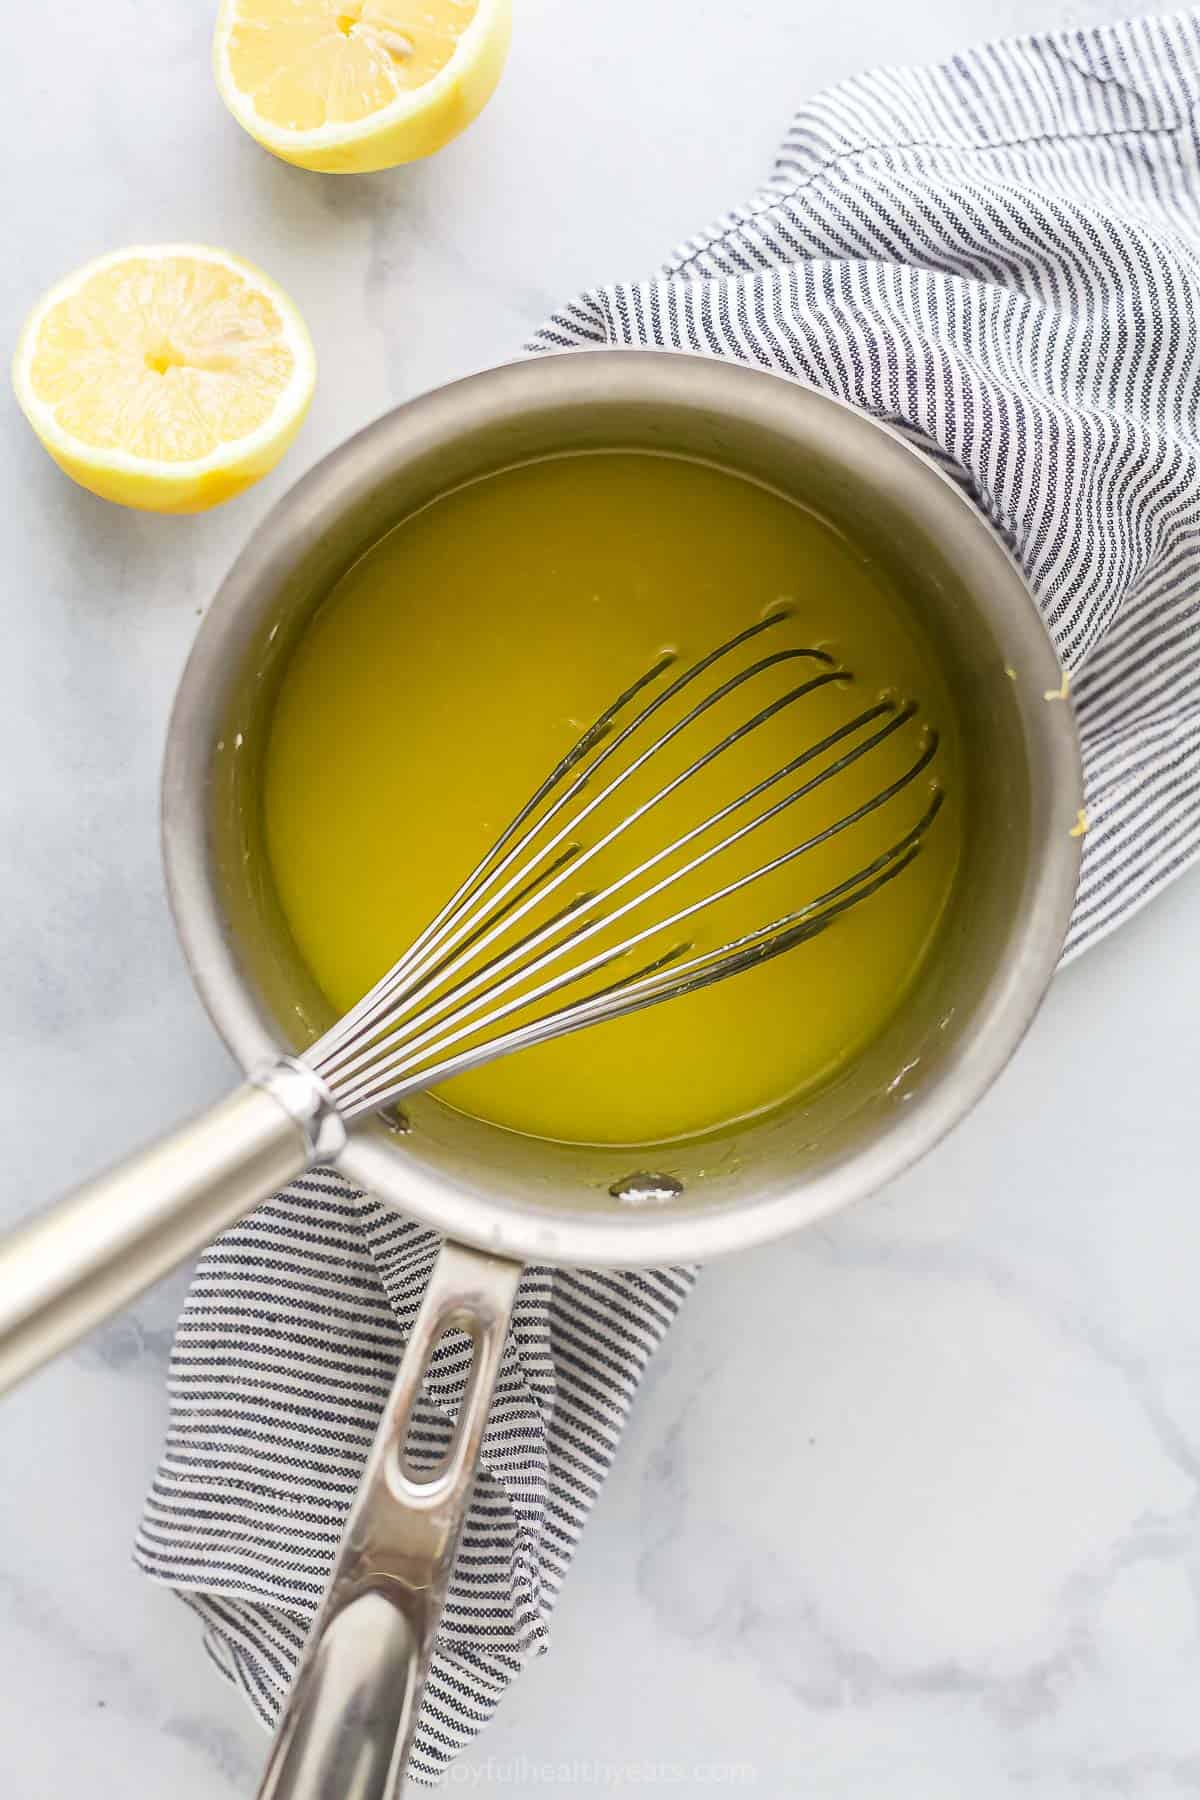 The lemon curd filling being whisked in a metal saucepan on top of a striped dish towel